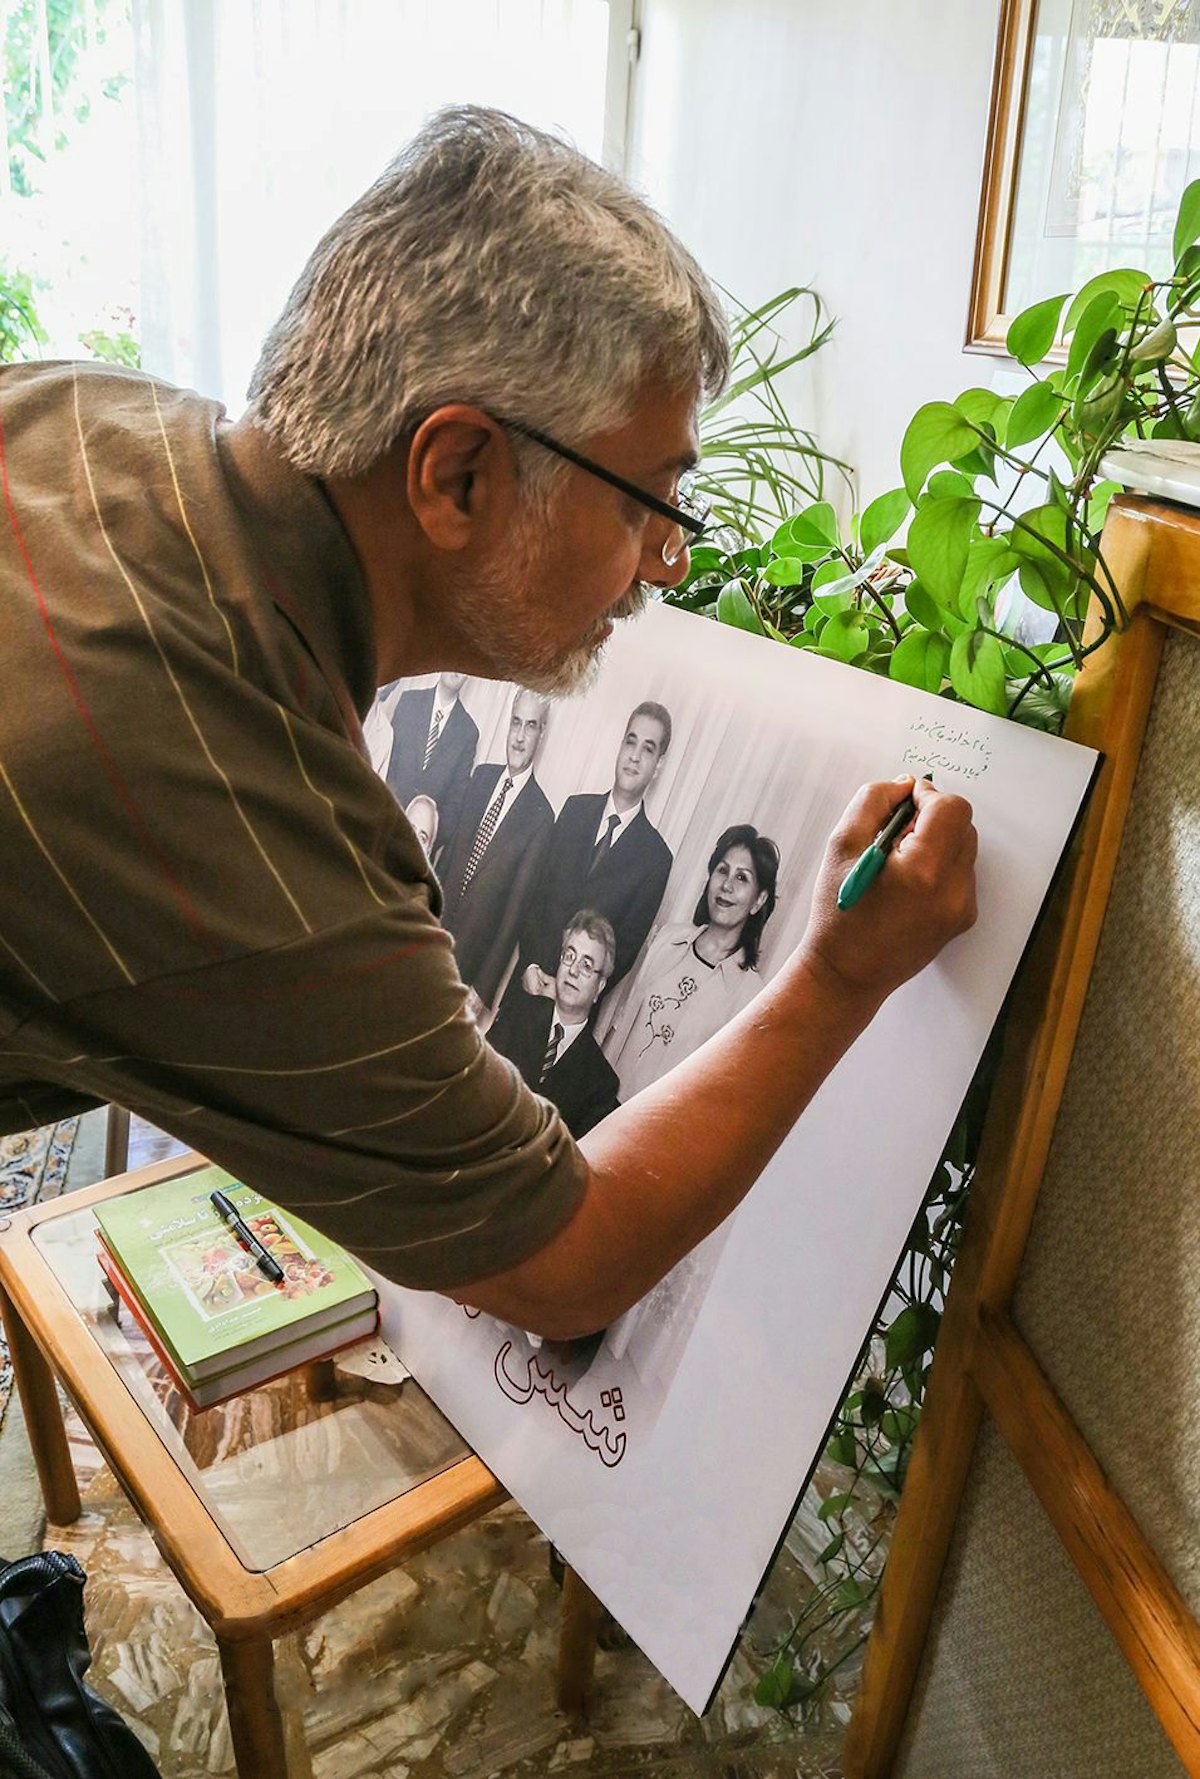 Issa Saharkhiz, a prominent Iranian journalist, signs a photo of the seven former Baha'i leaders in Iran.